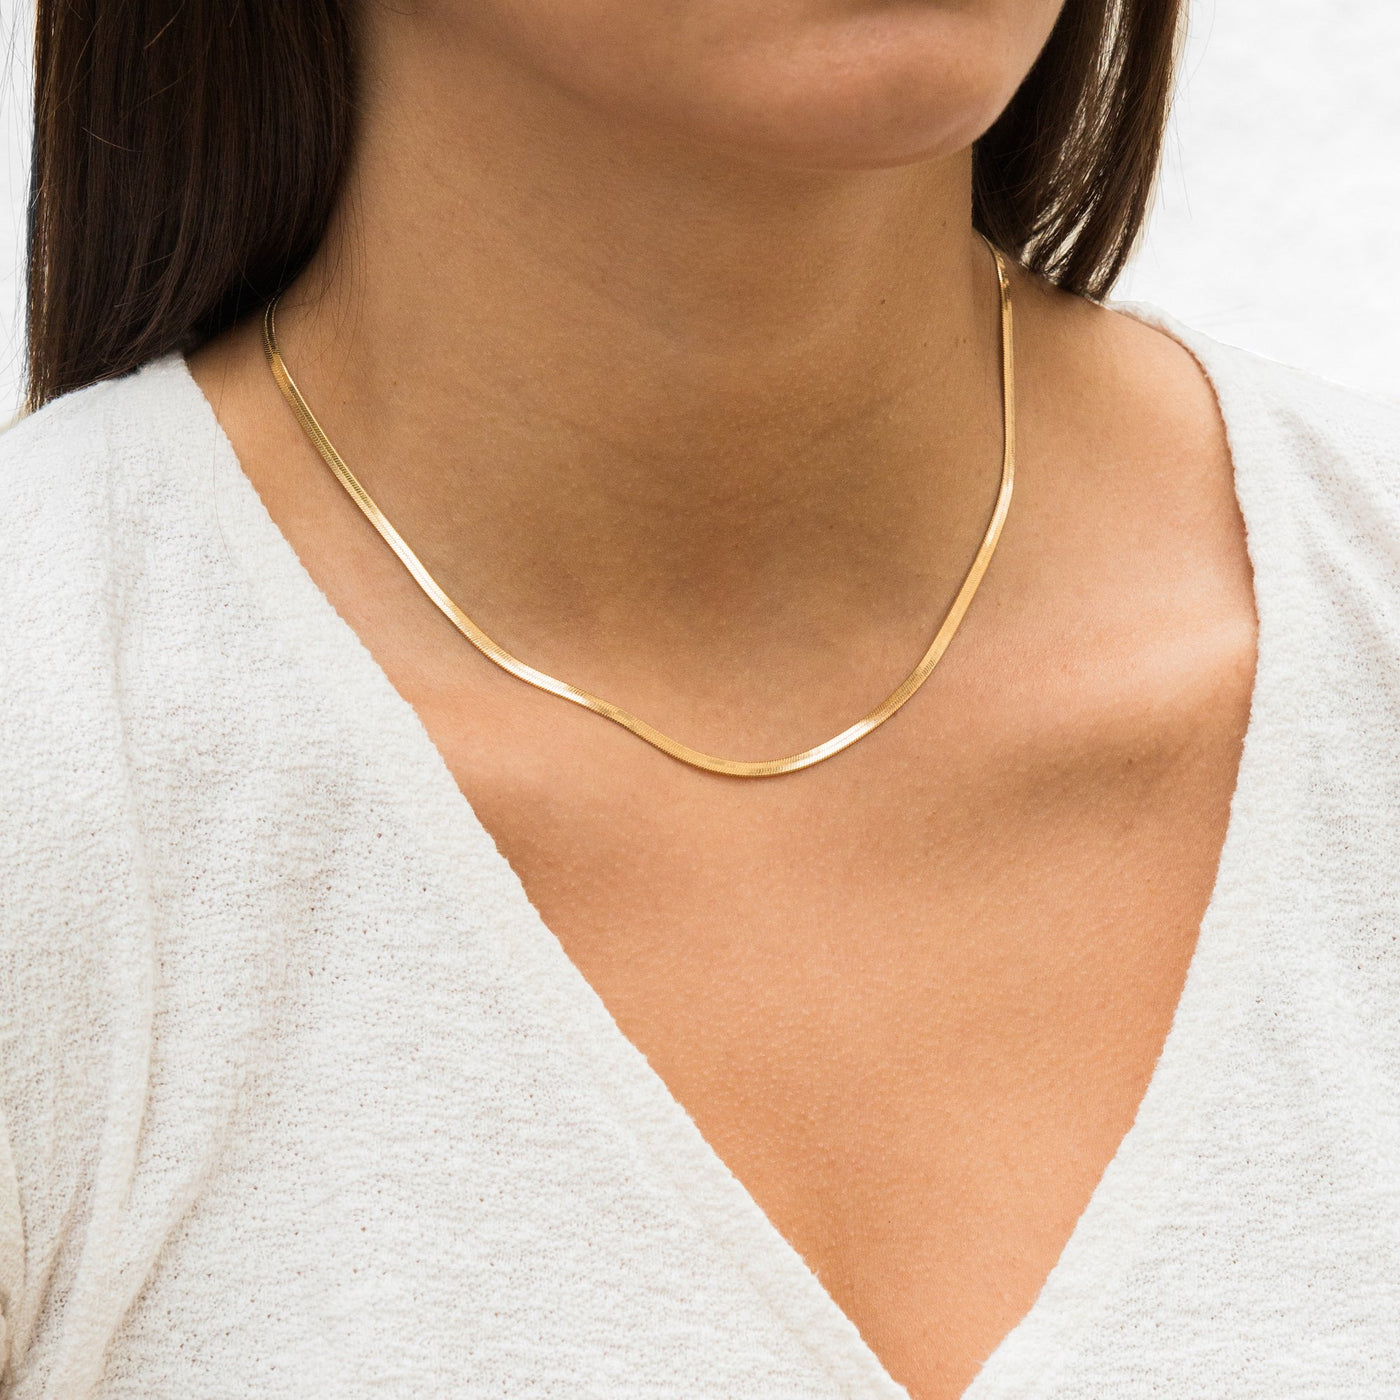 Herringbone Chain Necklace - 18K Solid Gold | Nominal